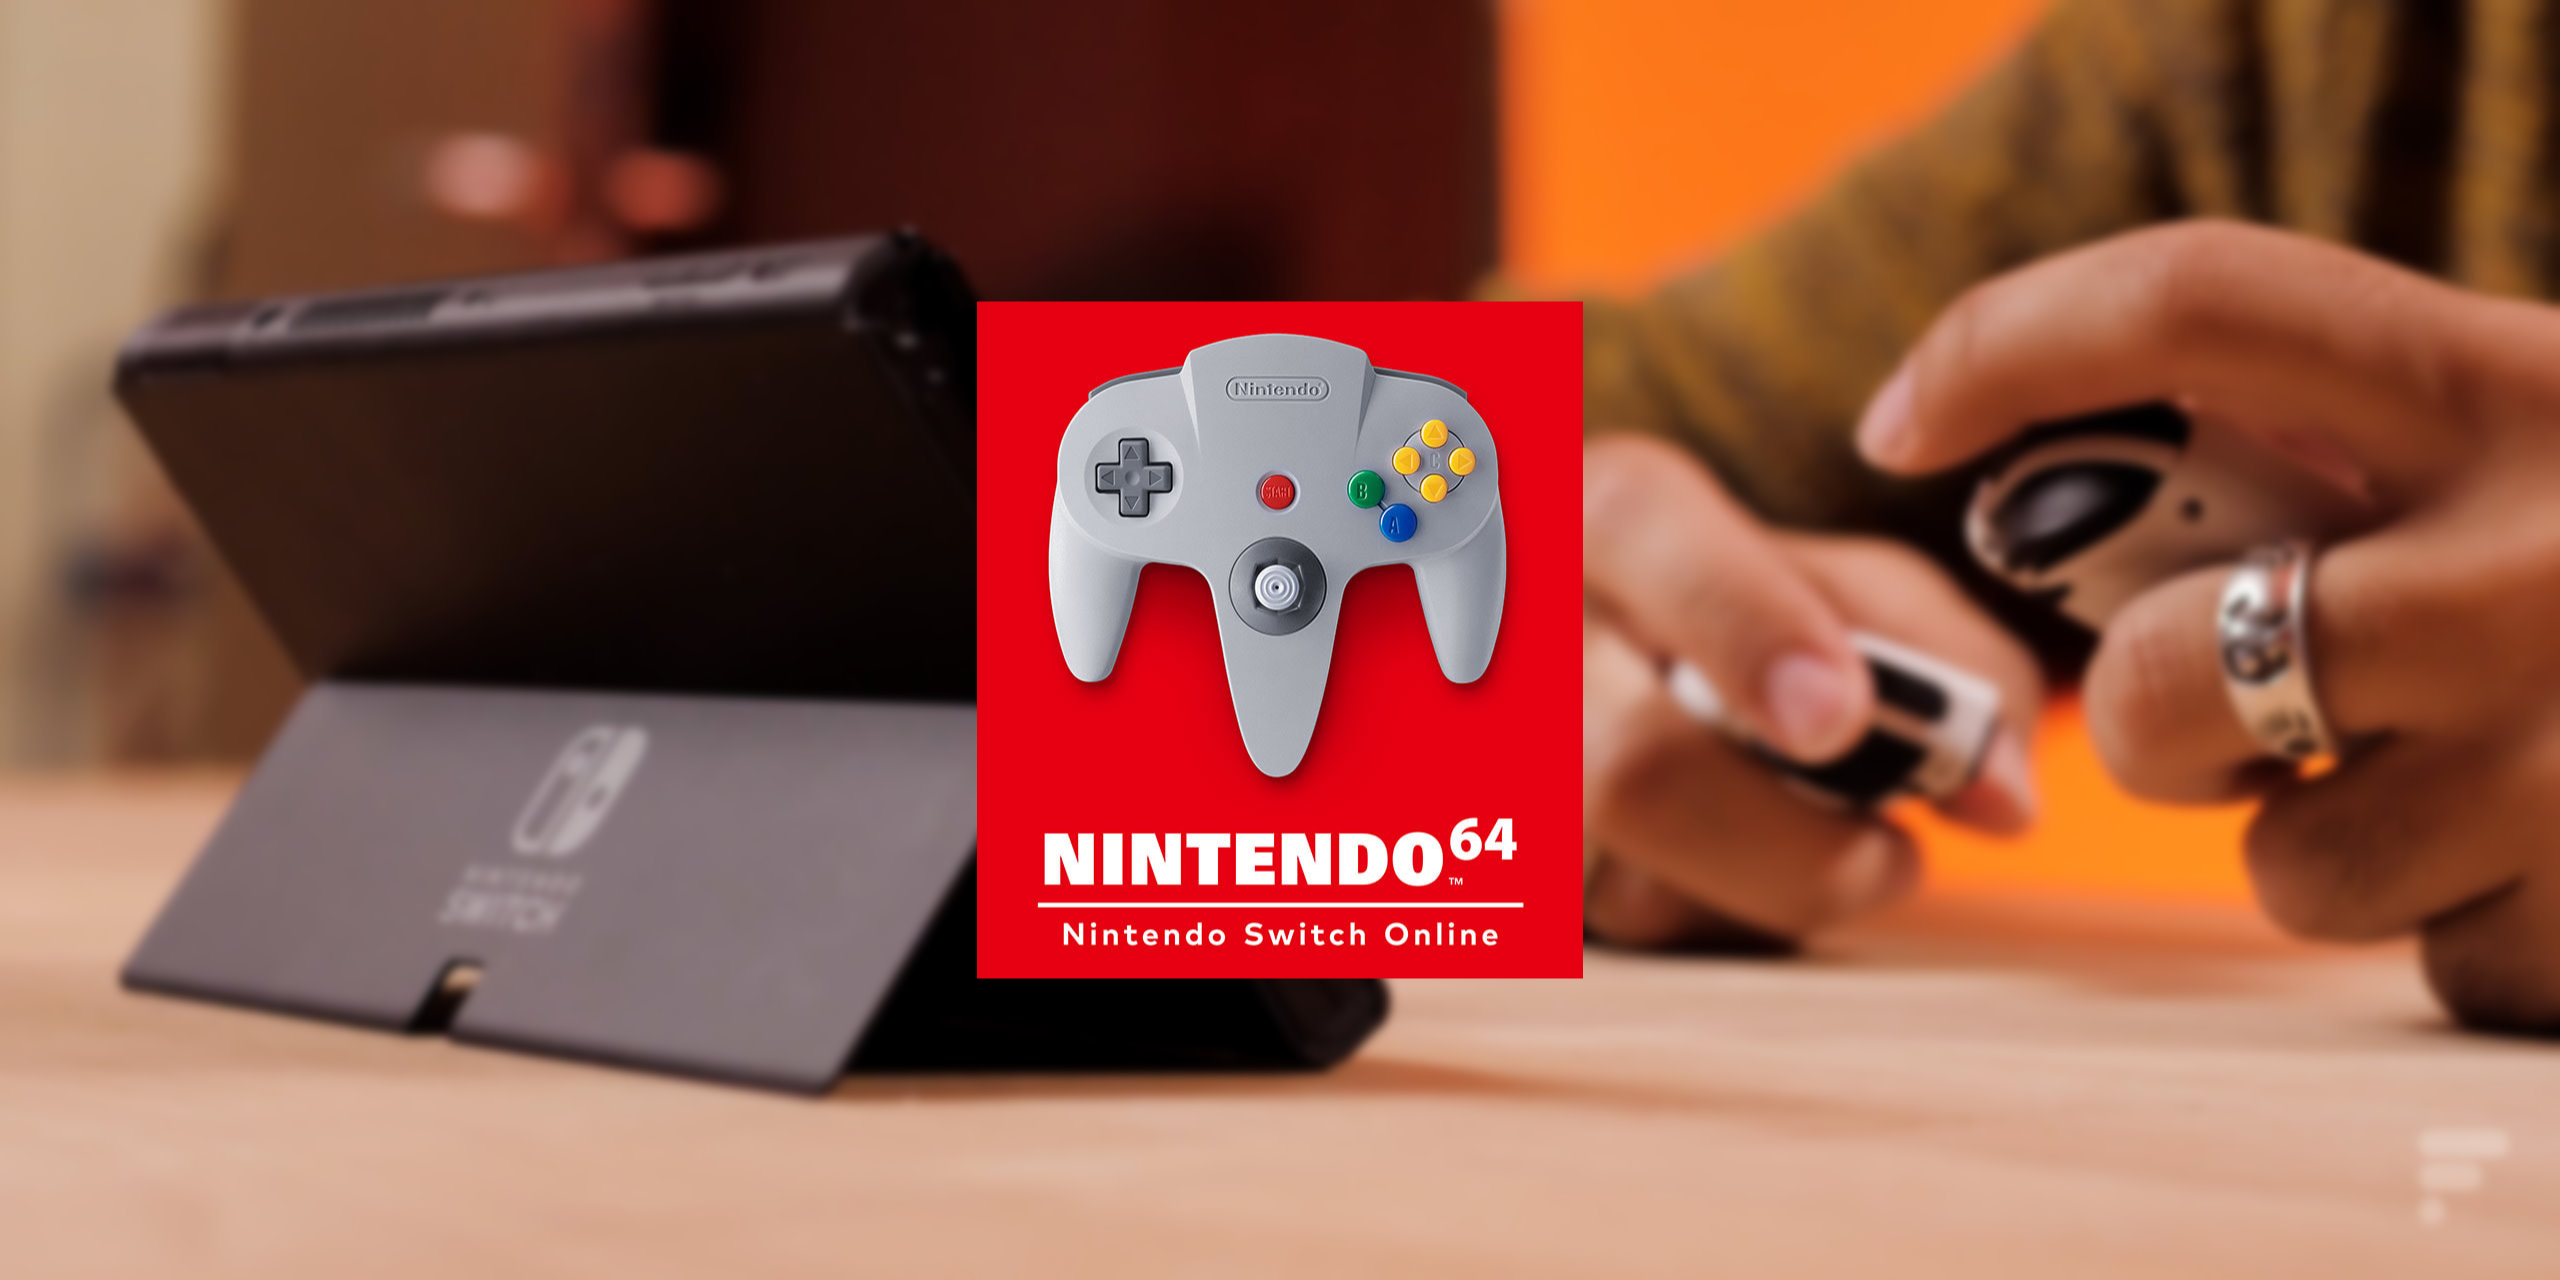 Nintendo has restocked the ever-elusive N64 controller for the Switch  (update: sold out) - The Verge